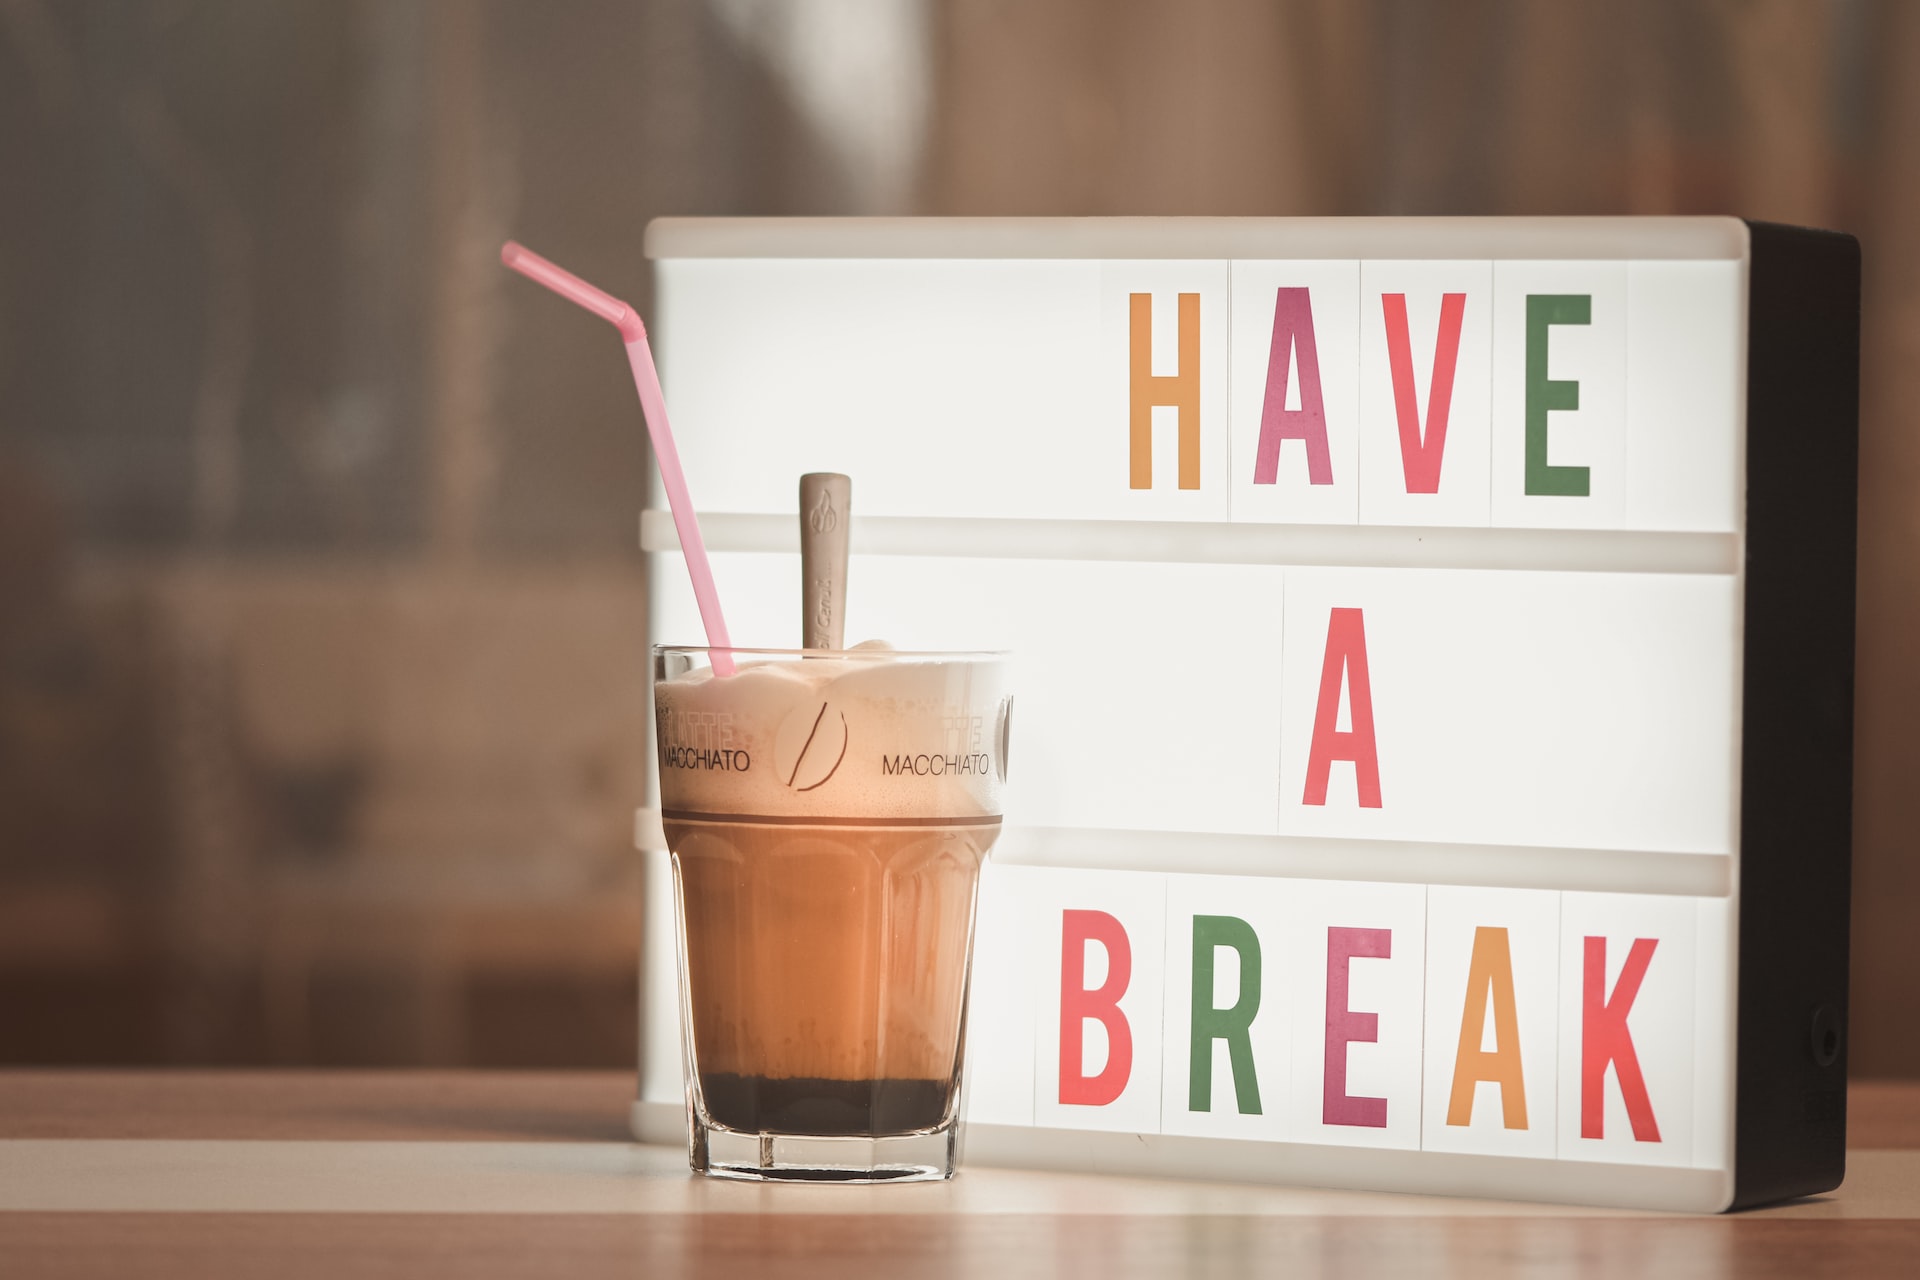 An iced-coffee in front of a have a break sign